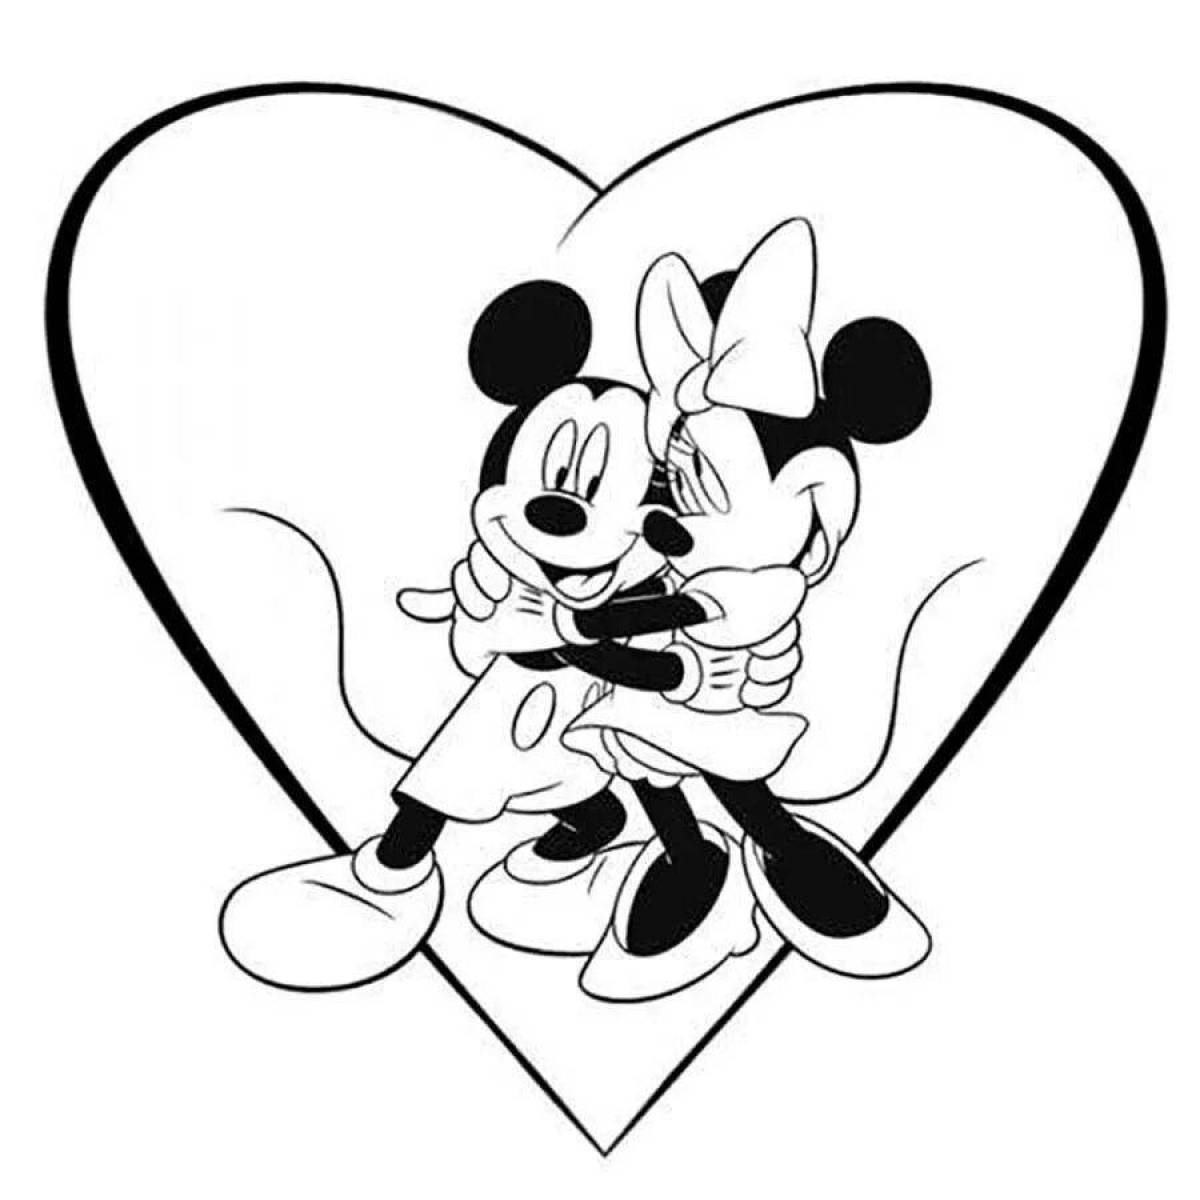 With mickey mouse #5